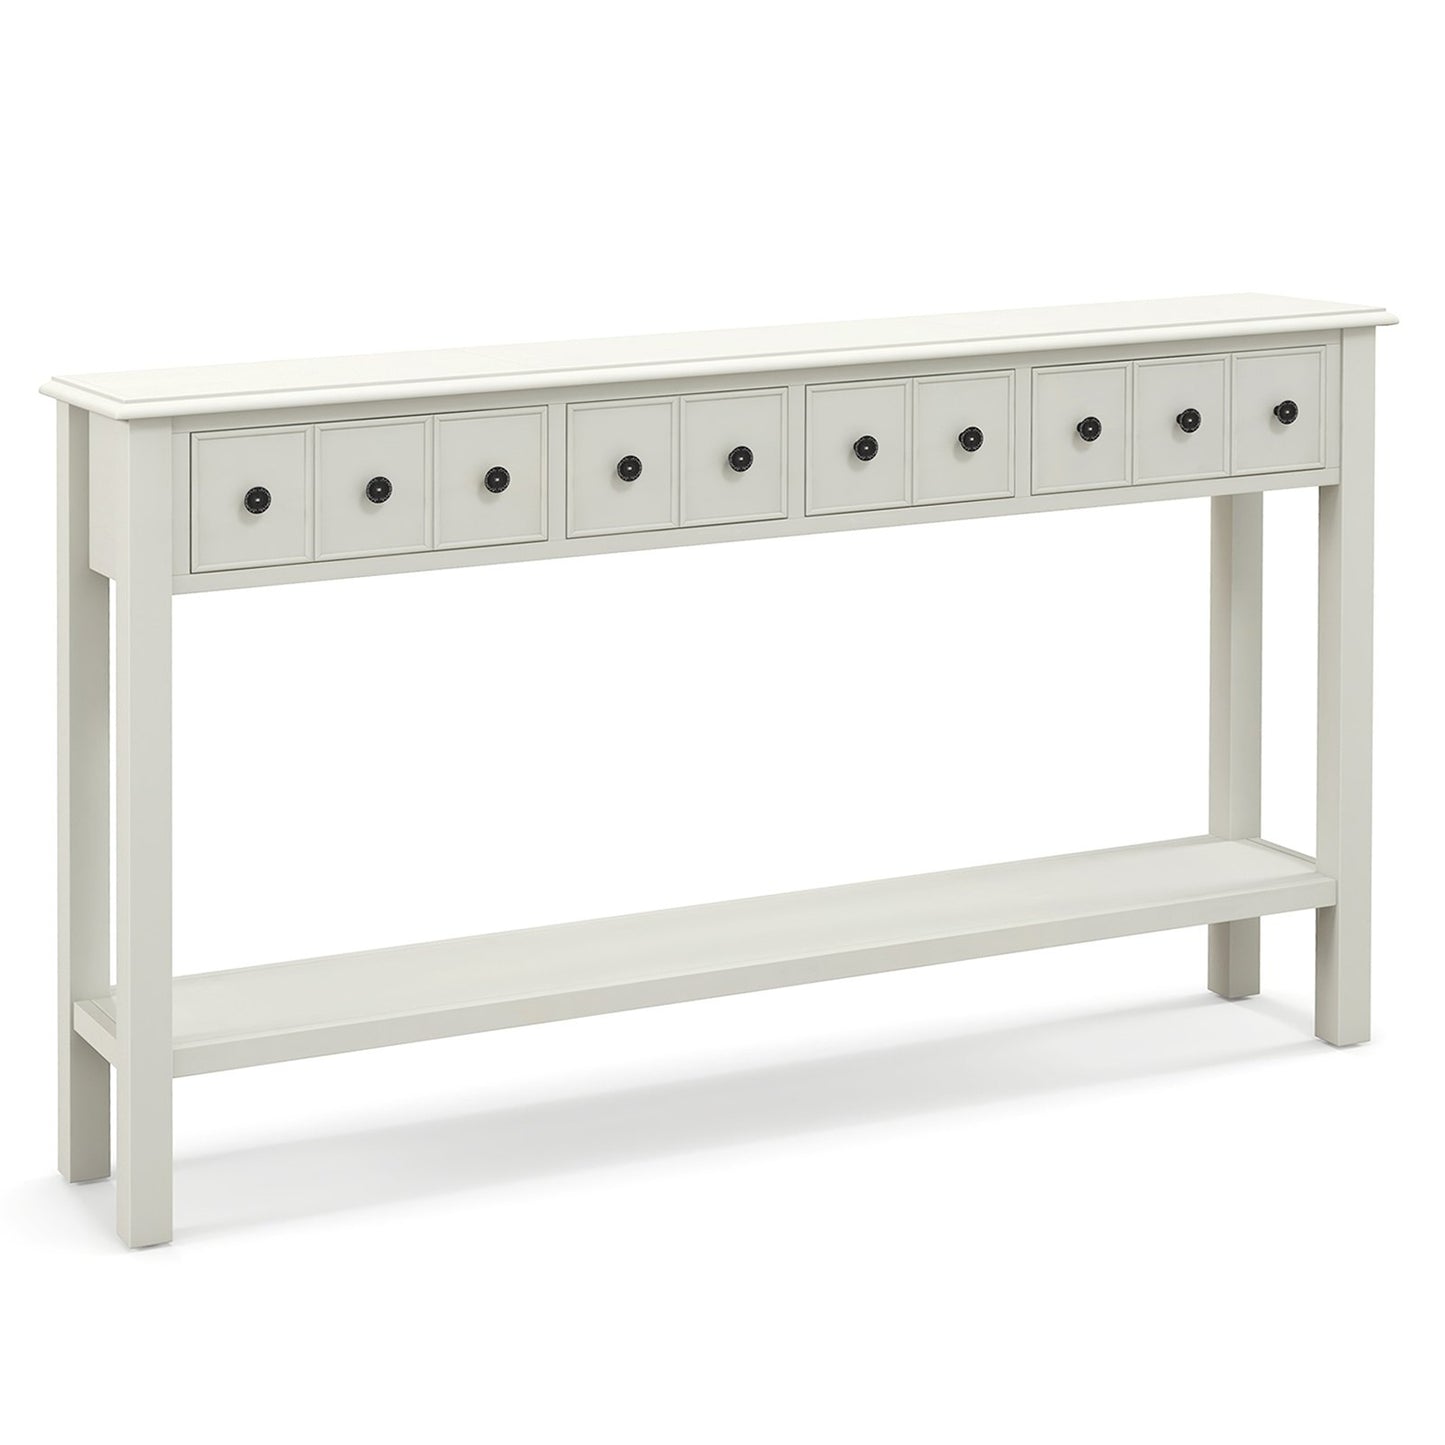 60 Inch Long Sofa Table with 4 Drawers and Open Shelf for Living Room, White